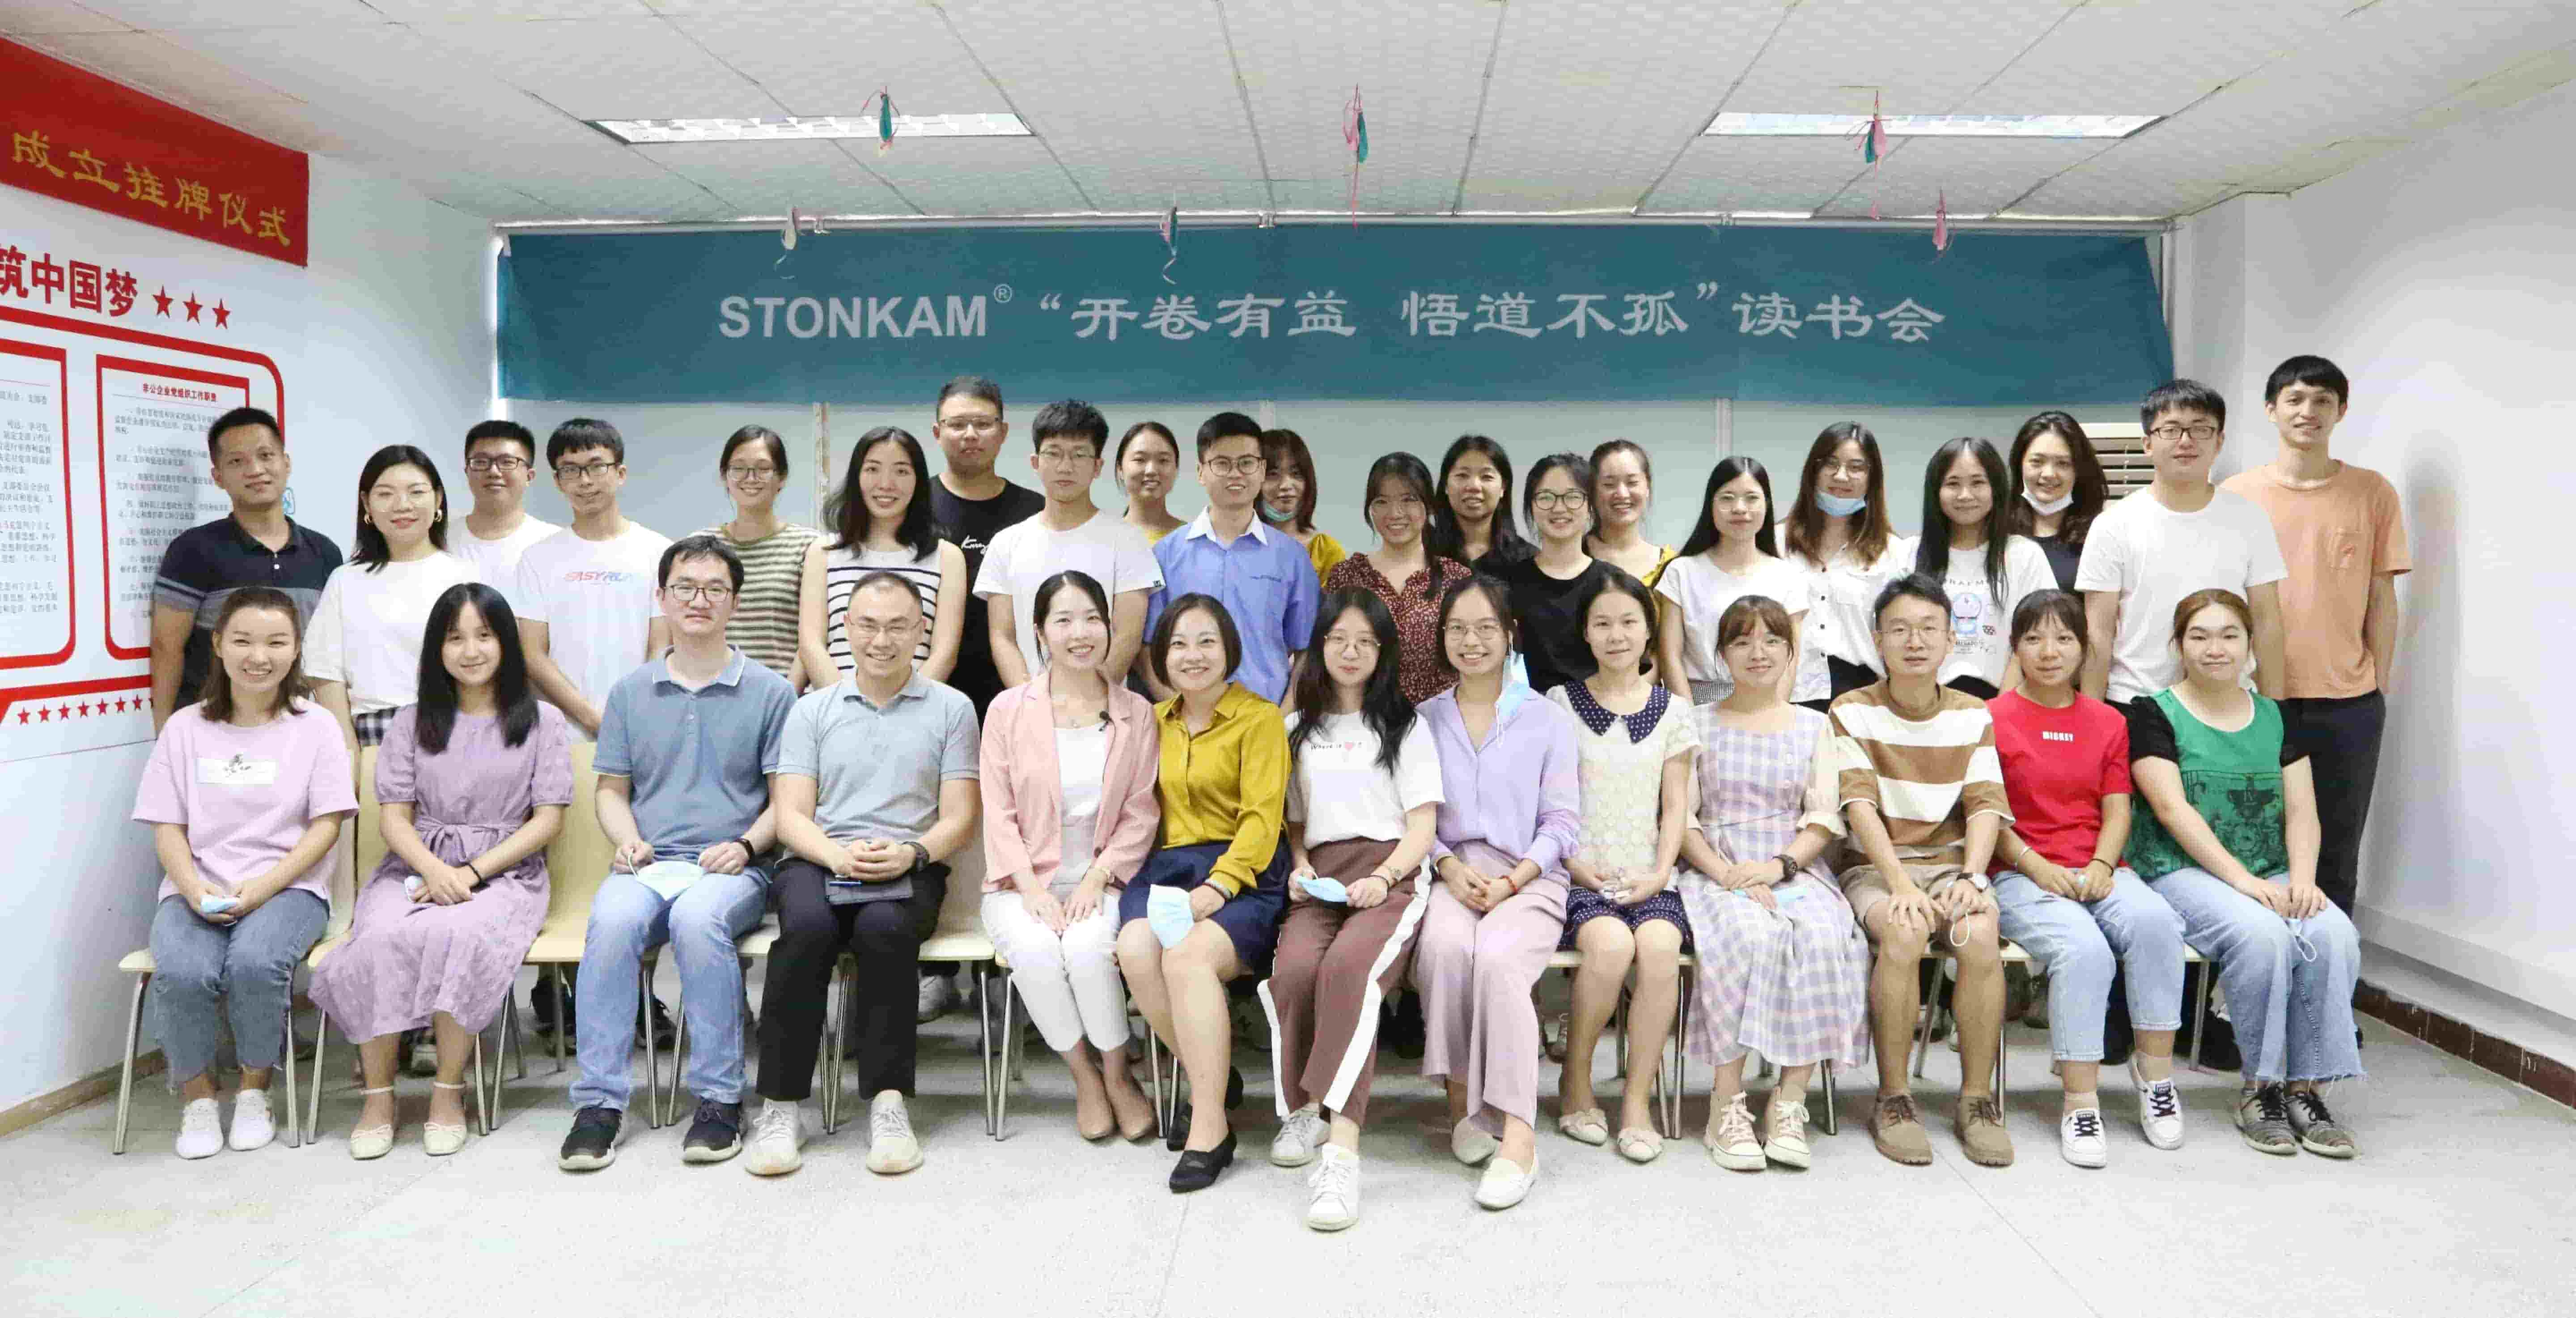 STONKAM’s first reading sharing meeting was successfully held